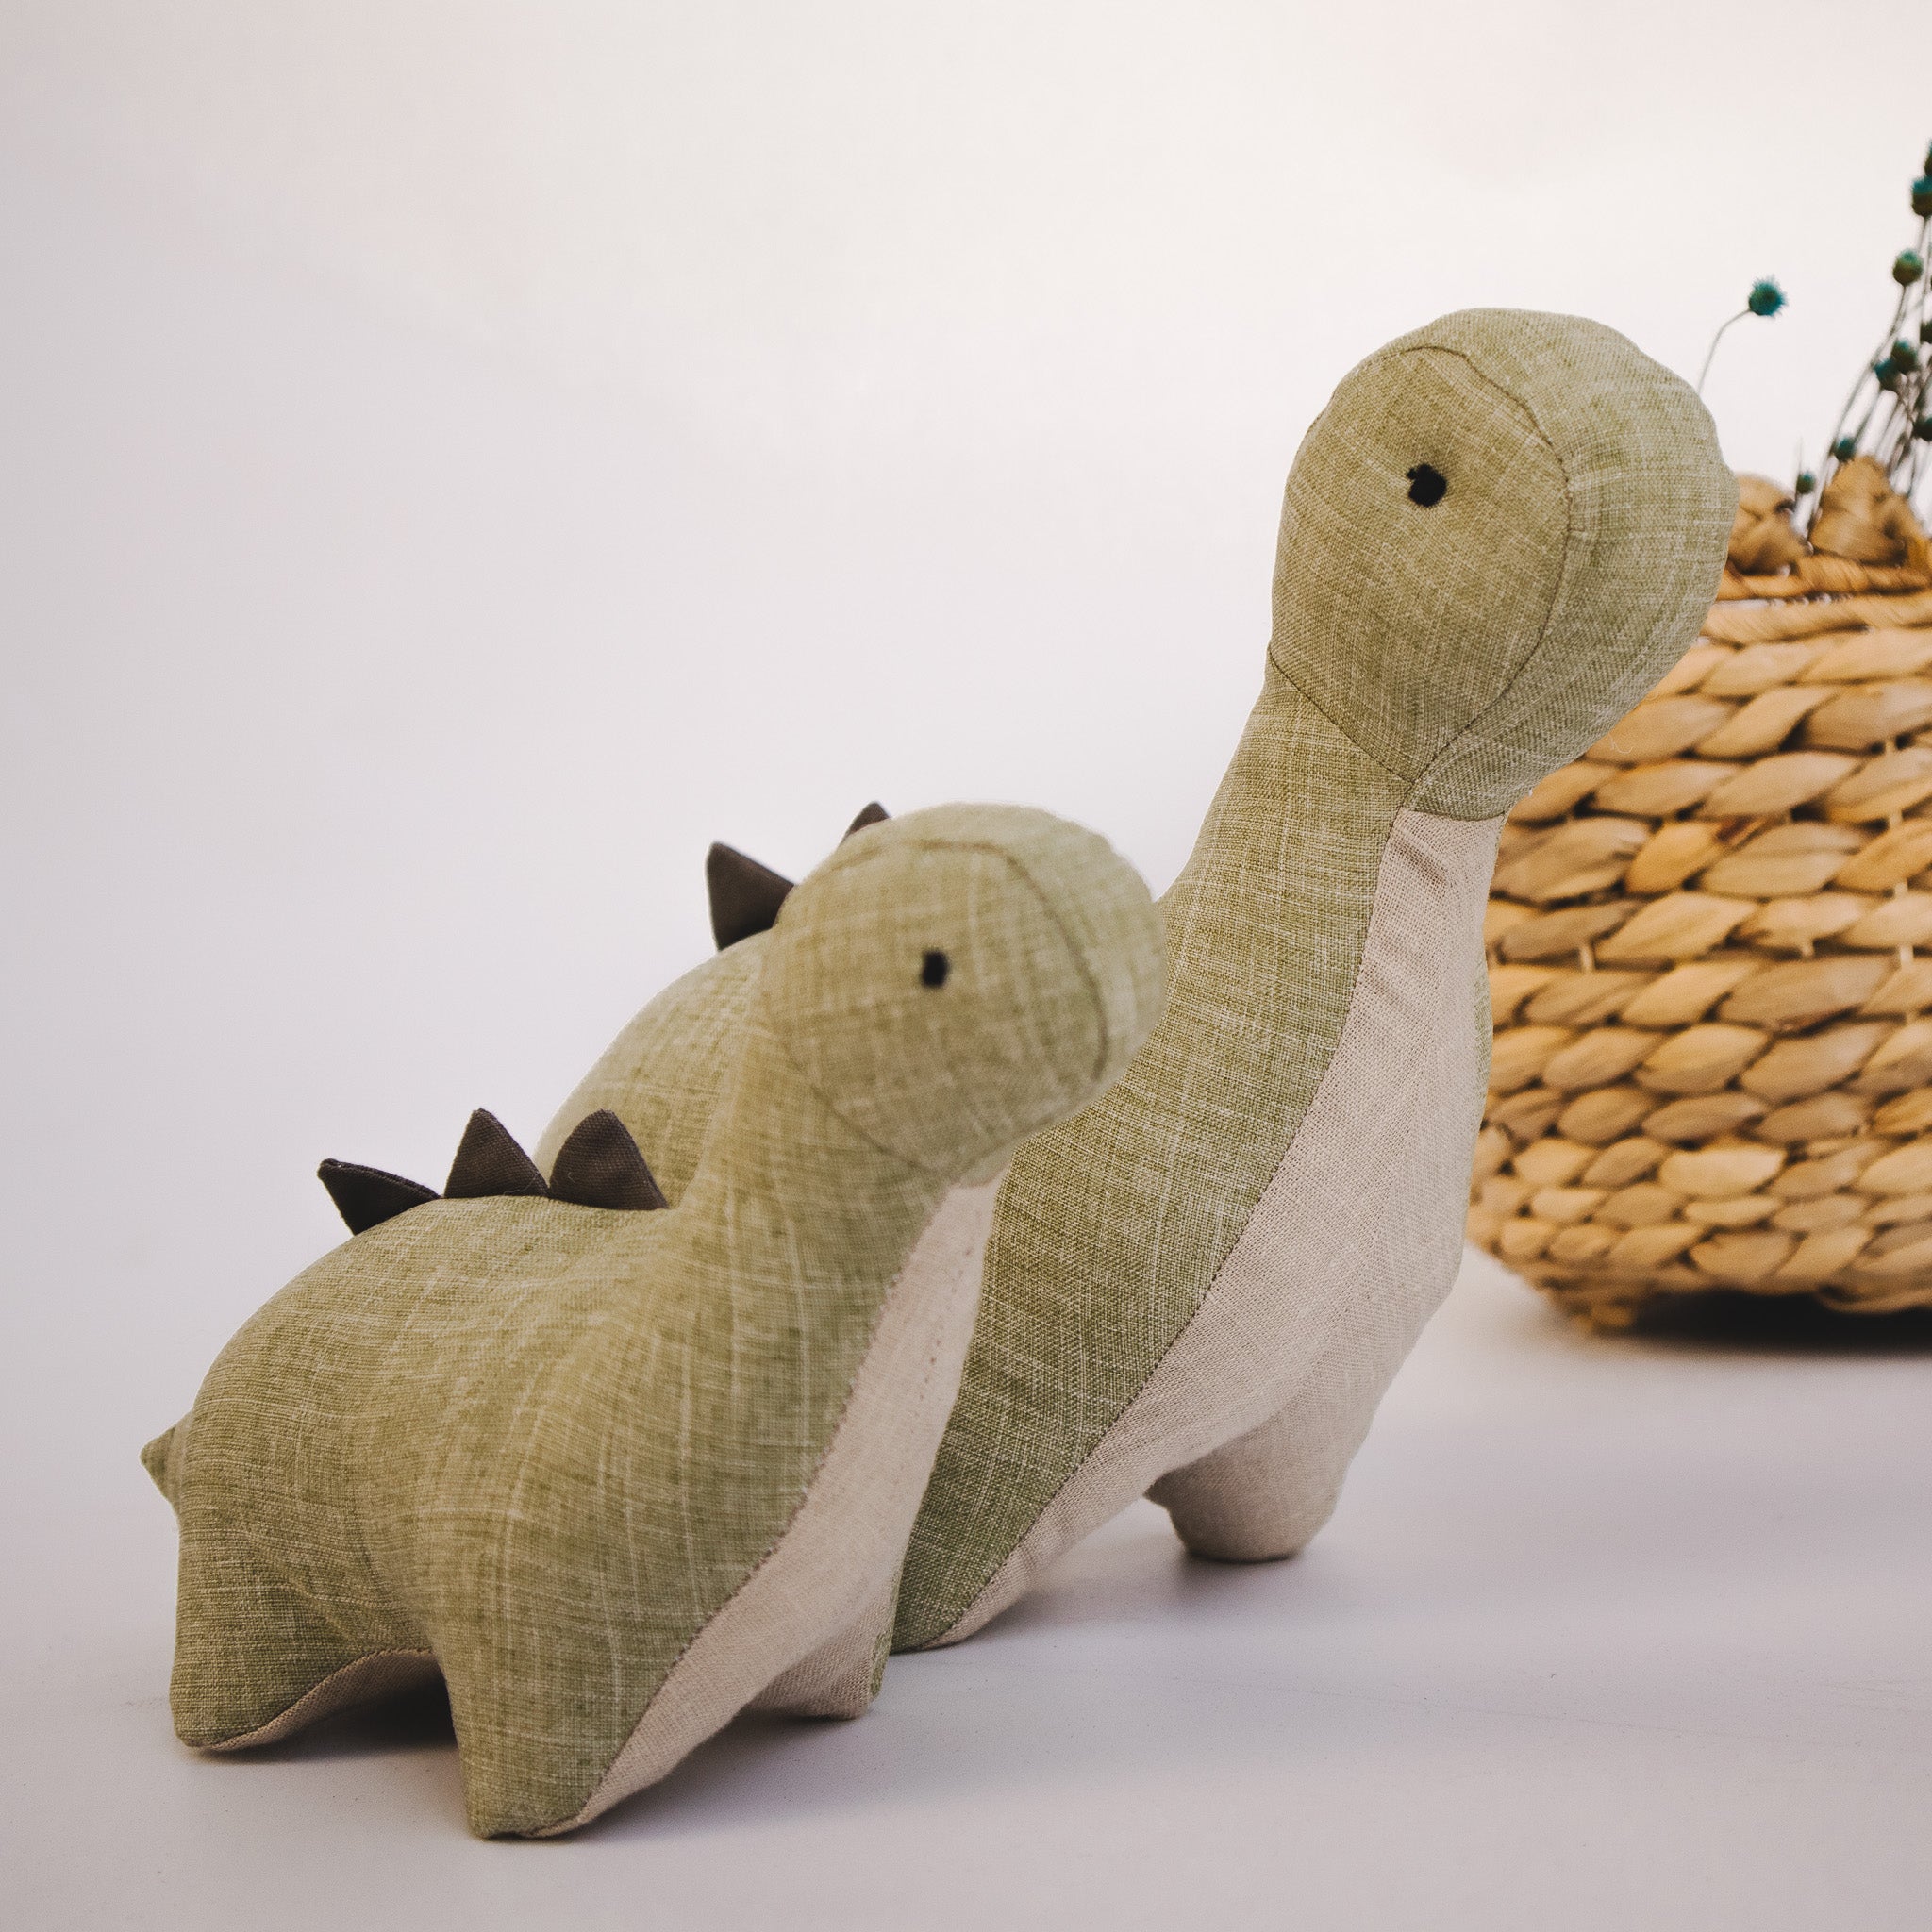 The Dinosaur Soft Toy Sewing Pattern